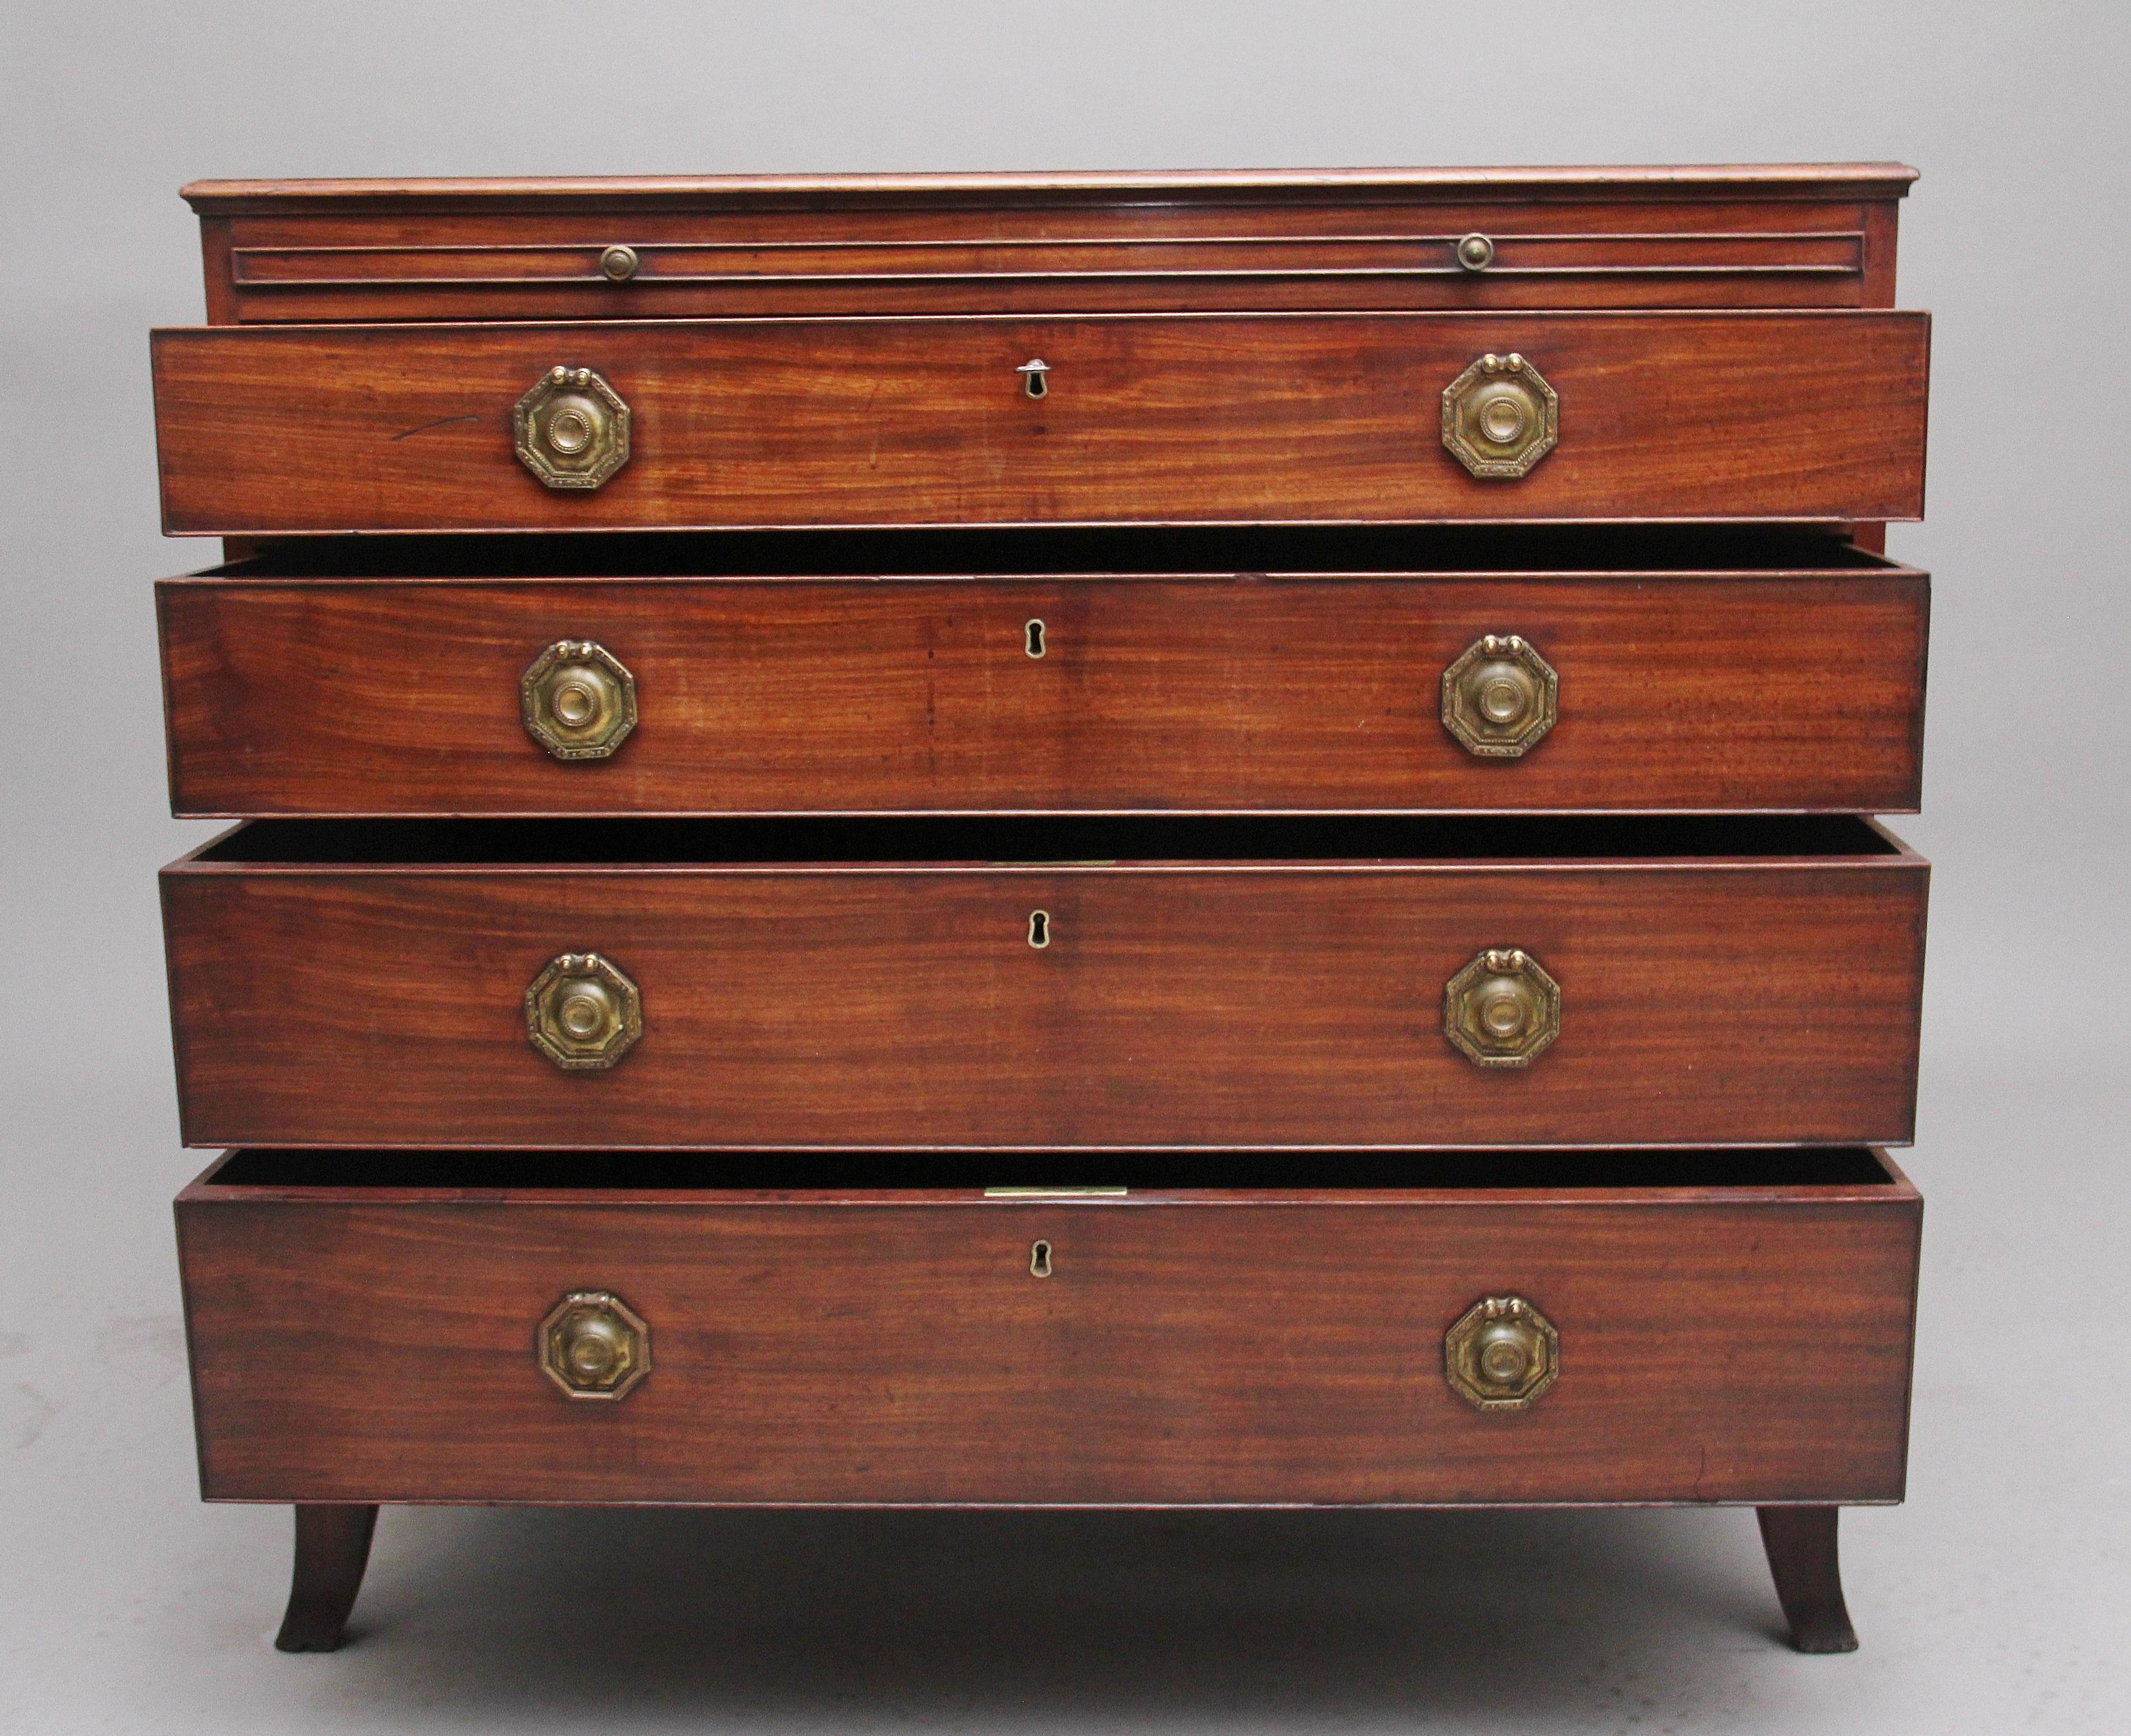 18th century mahogany chest of drawers, the moulded edge top above a brushing slide with turned brass knob handles, four graduated mahogany lined drawers below with brass engraved ring and plate handles, having a shaped apron and standing on splay